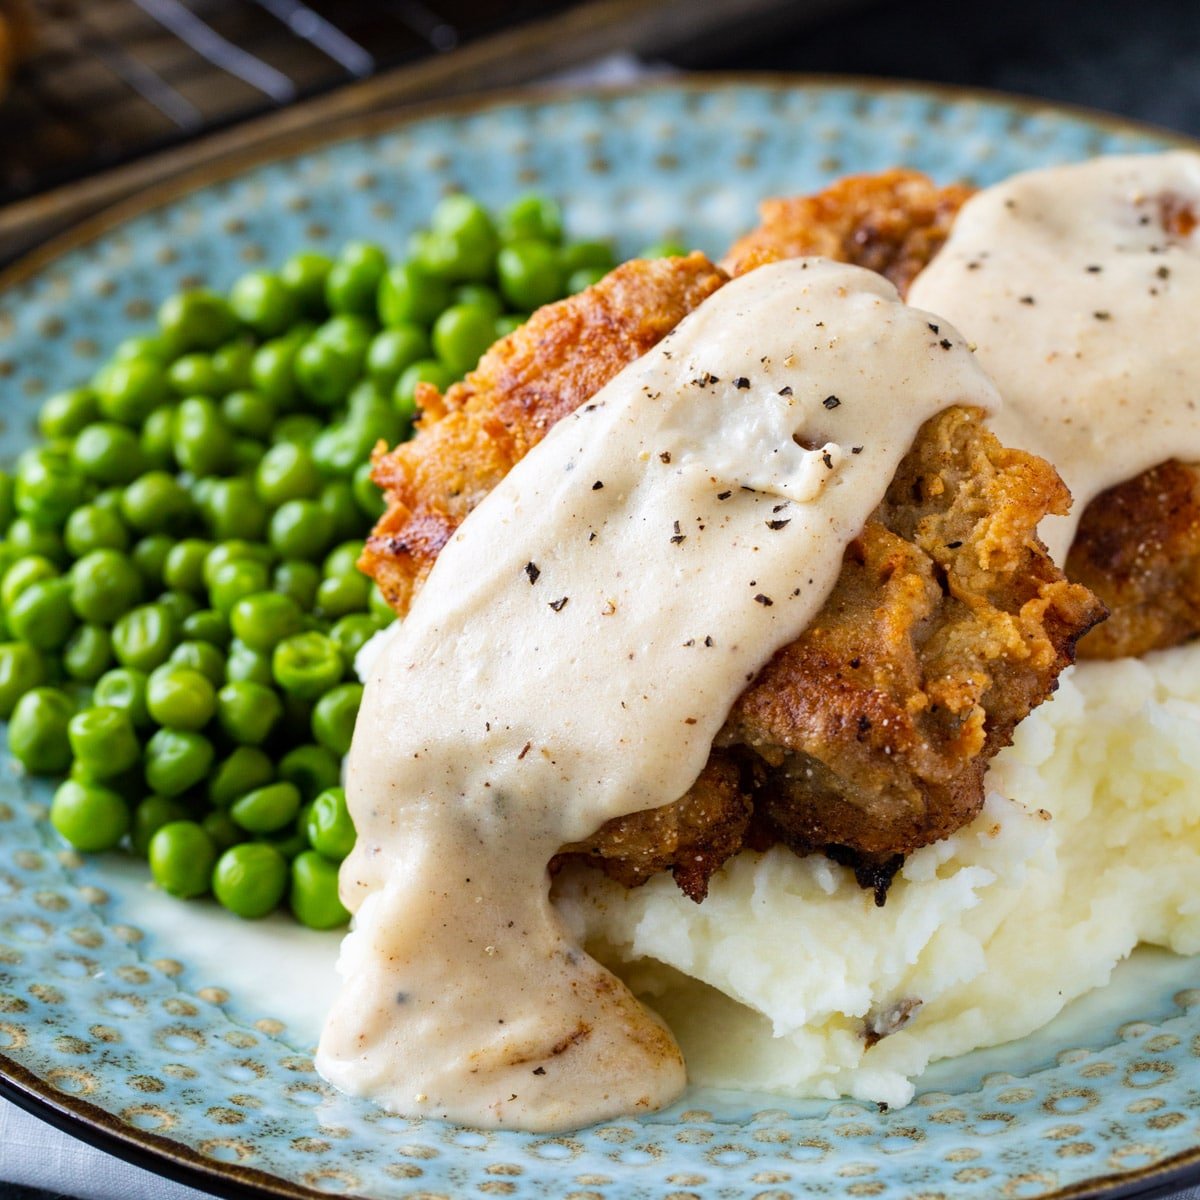 Chicken Fried Steak with White Gravy over mashed potatoes with a side of peas.